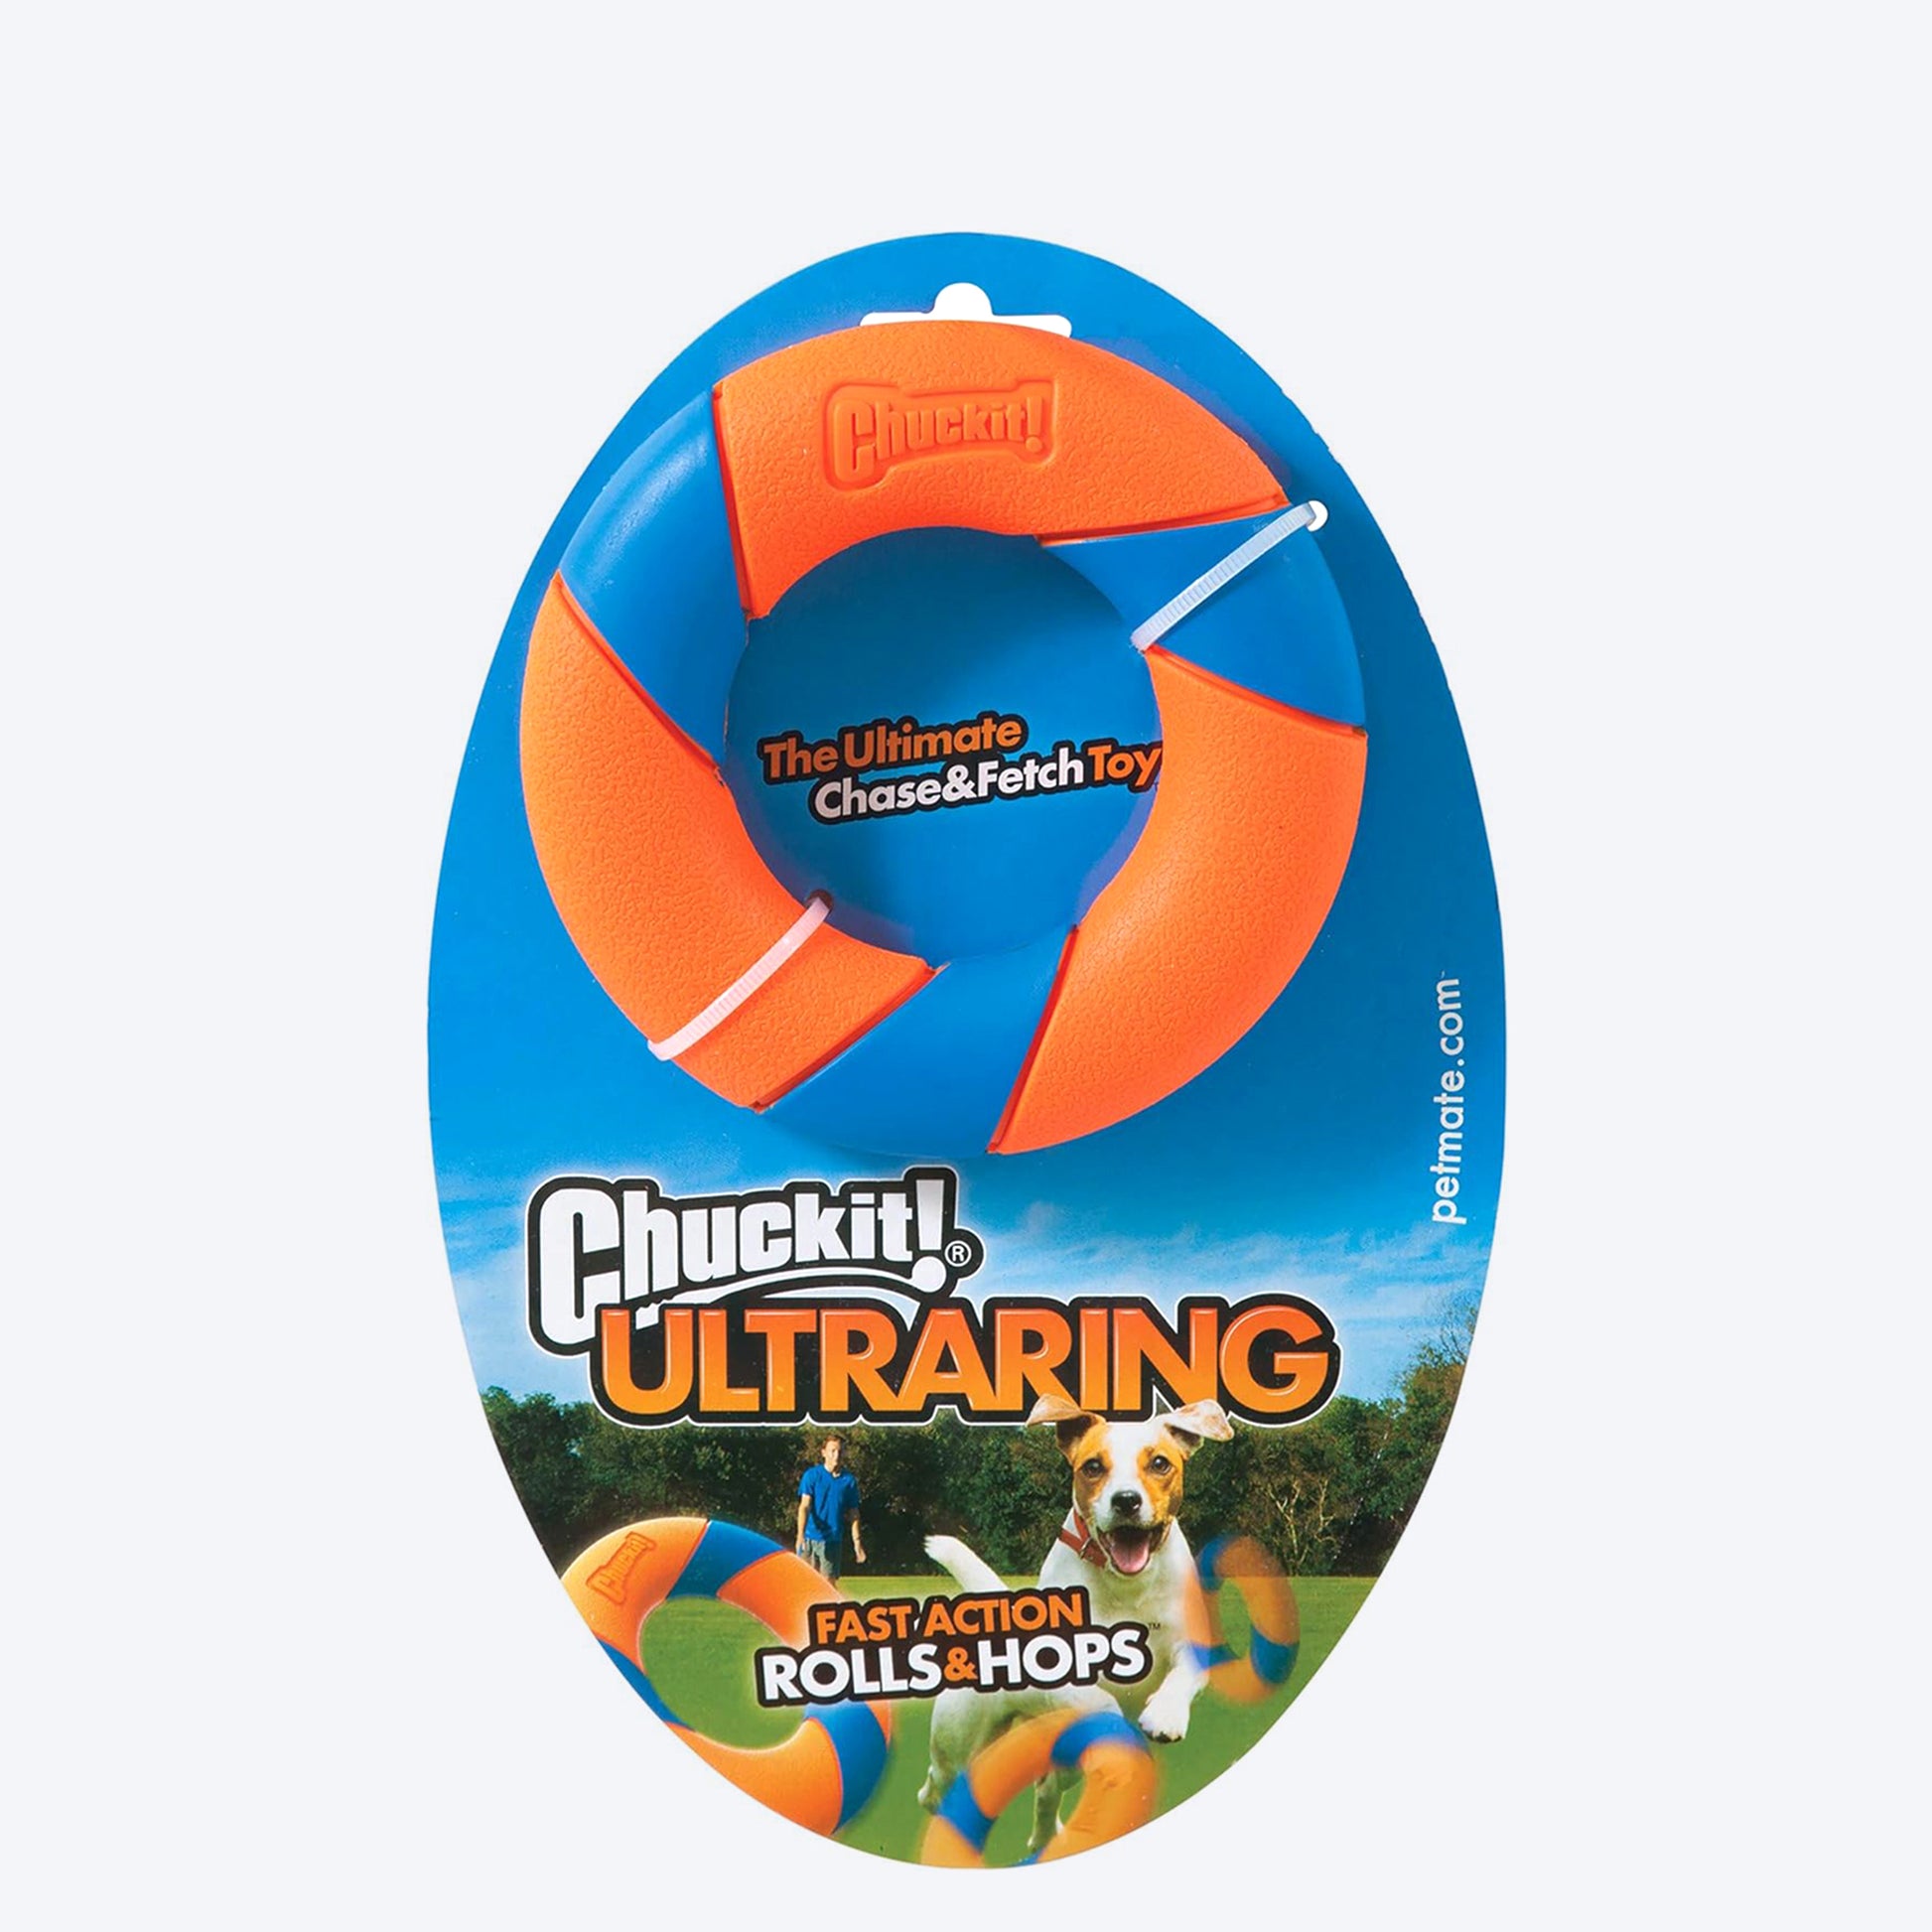 Chuckit! Ultra Ring Dog Toy - Orange & Blue - Heads Up For Tails